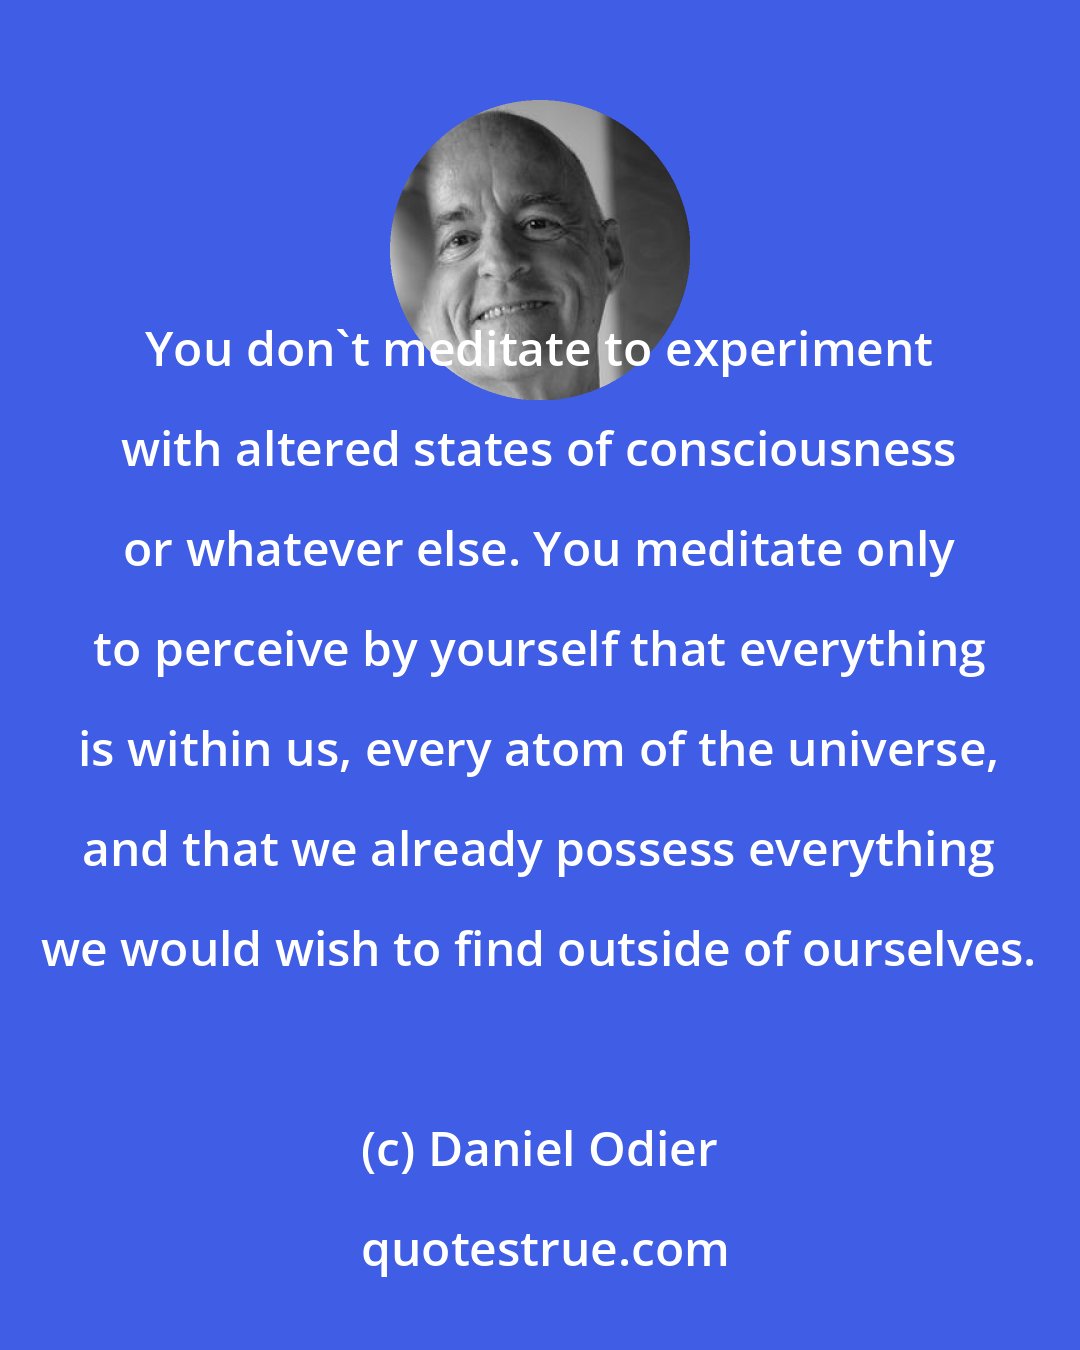 Daniel Odier: You don't meditate to experiment with altered states of consciousness or whatever else. You meditate only to perceive by yourself that everything is within us, every atom of the universe, and that we already possess everything we would wish to find outside of ourselves.